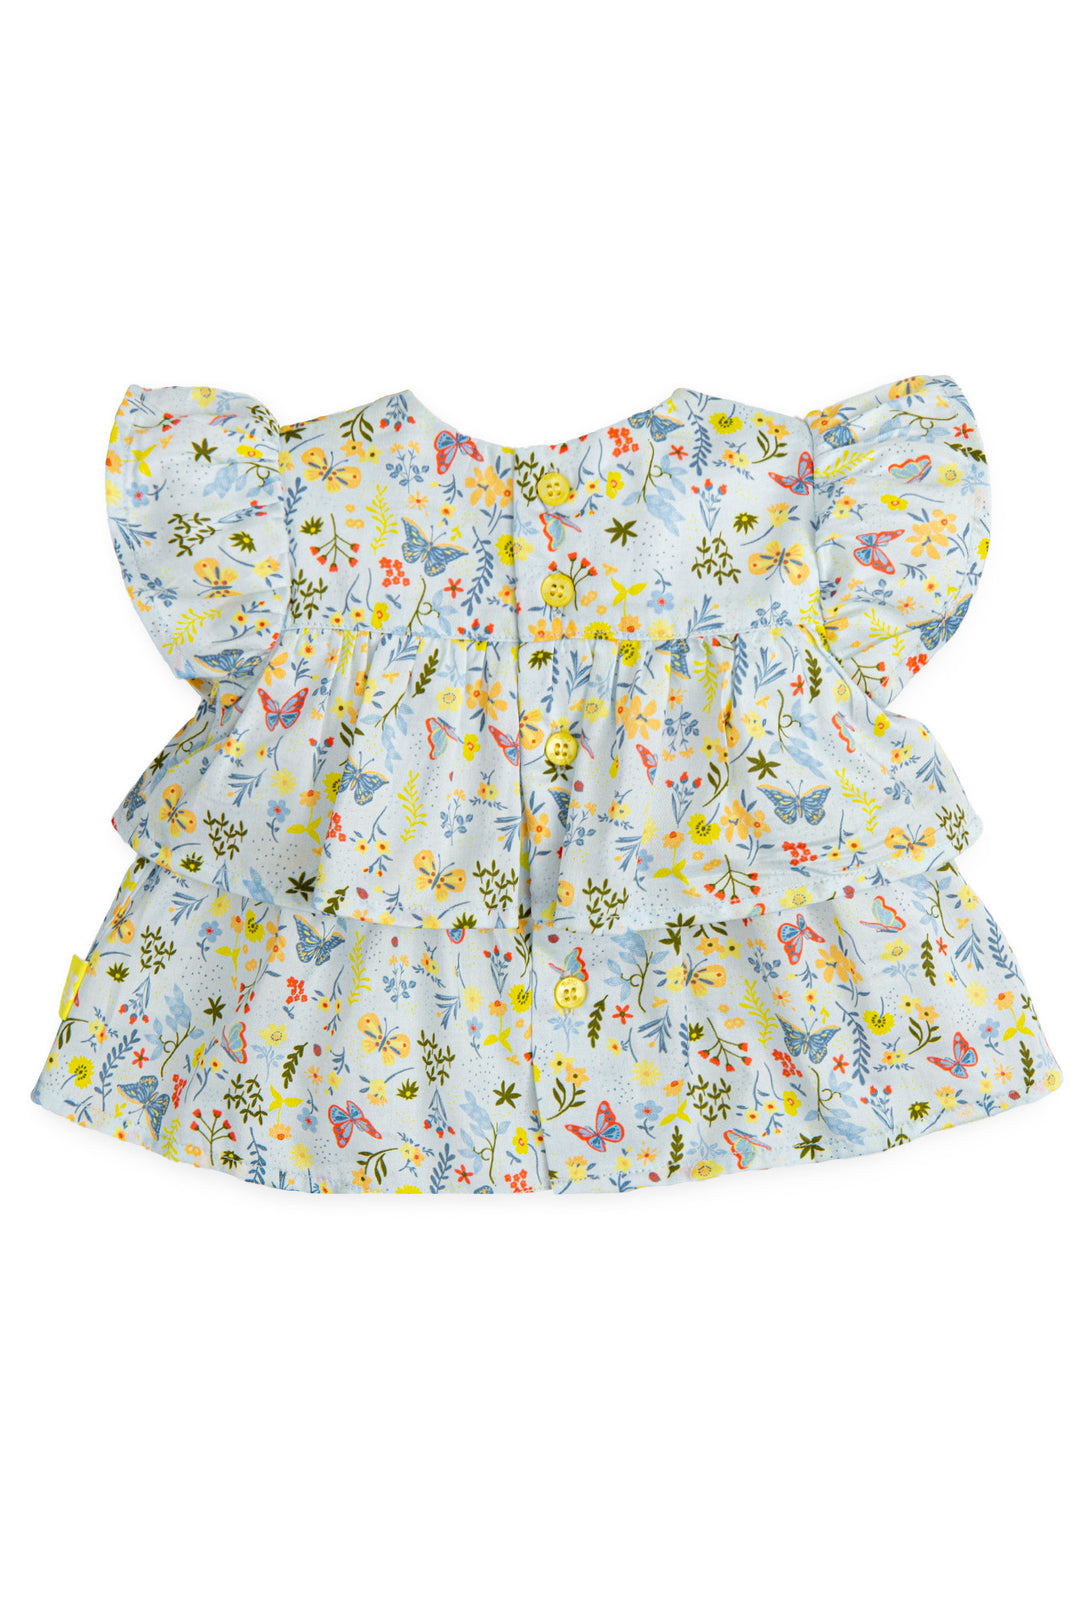 Tutto Piccolo "Carmen" Blue & Yellow Floral Blouse & Bloomers | Millie and John